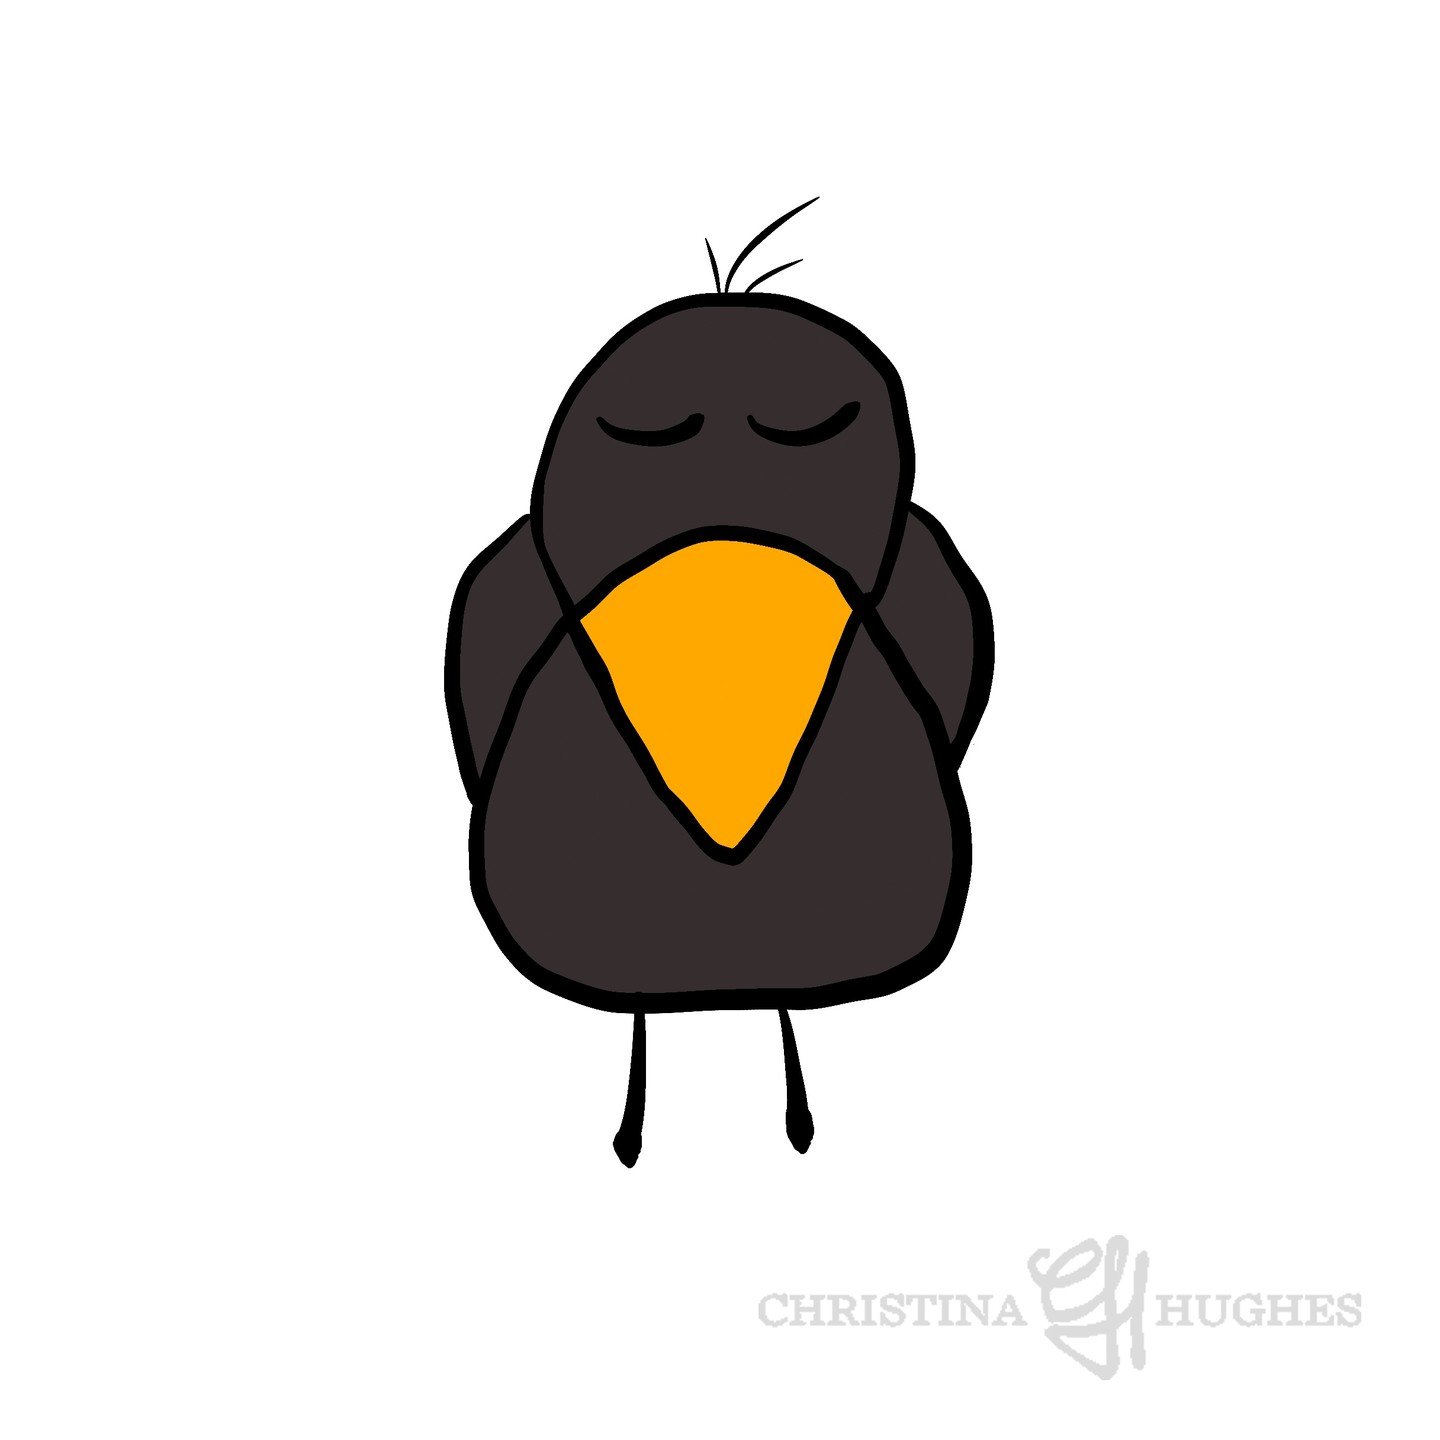 A quick bird drawing with simple lines. I enjoy simplistic drawings &ndash; the challenge to use as little as possible and as much as necessary to create a character. ✐➰
◀︎
▲
▶︎
▼
►
▲
#simplelines #minimalistart #blackbird #blackbirdart #picturebooka